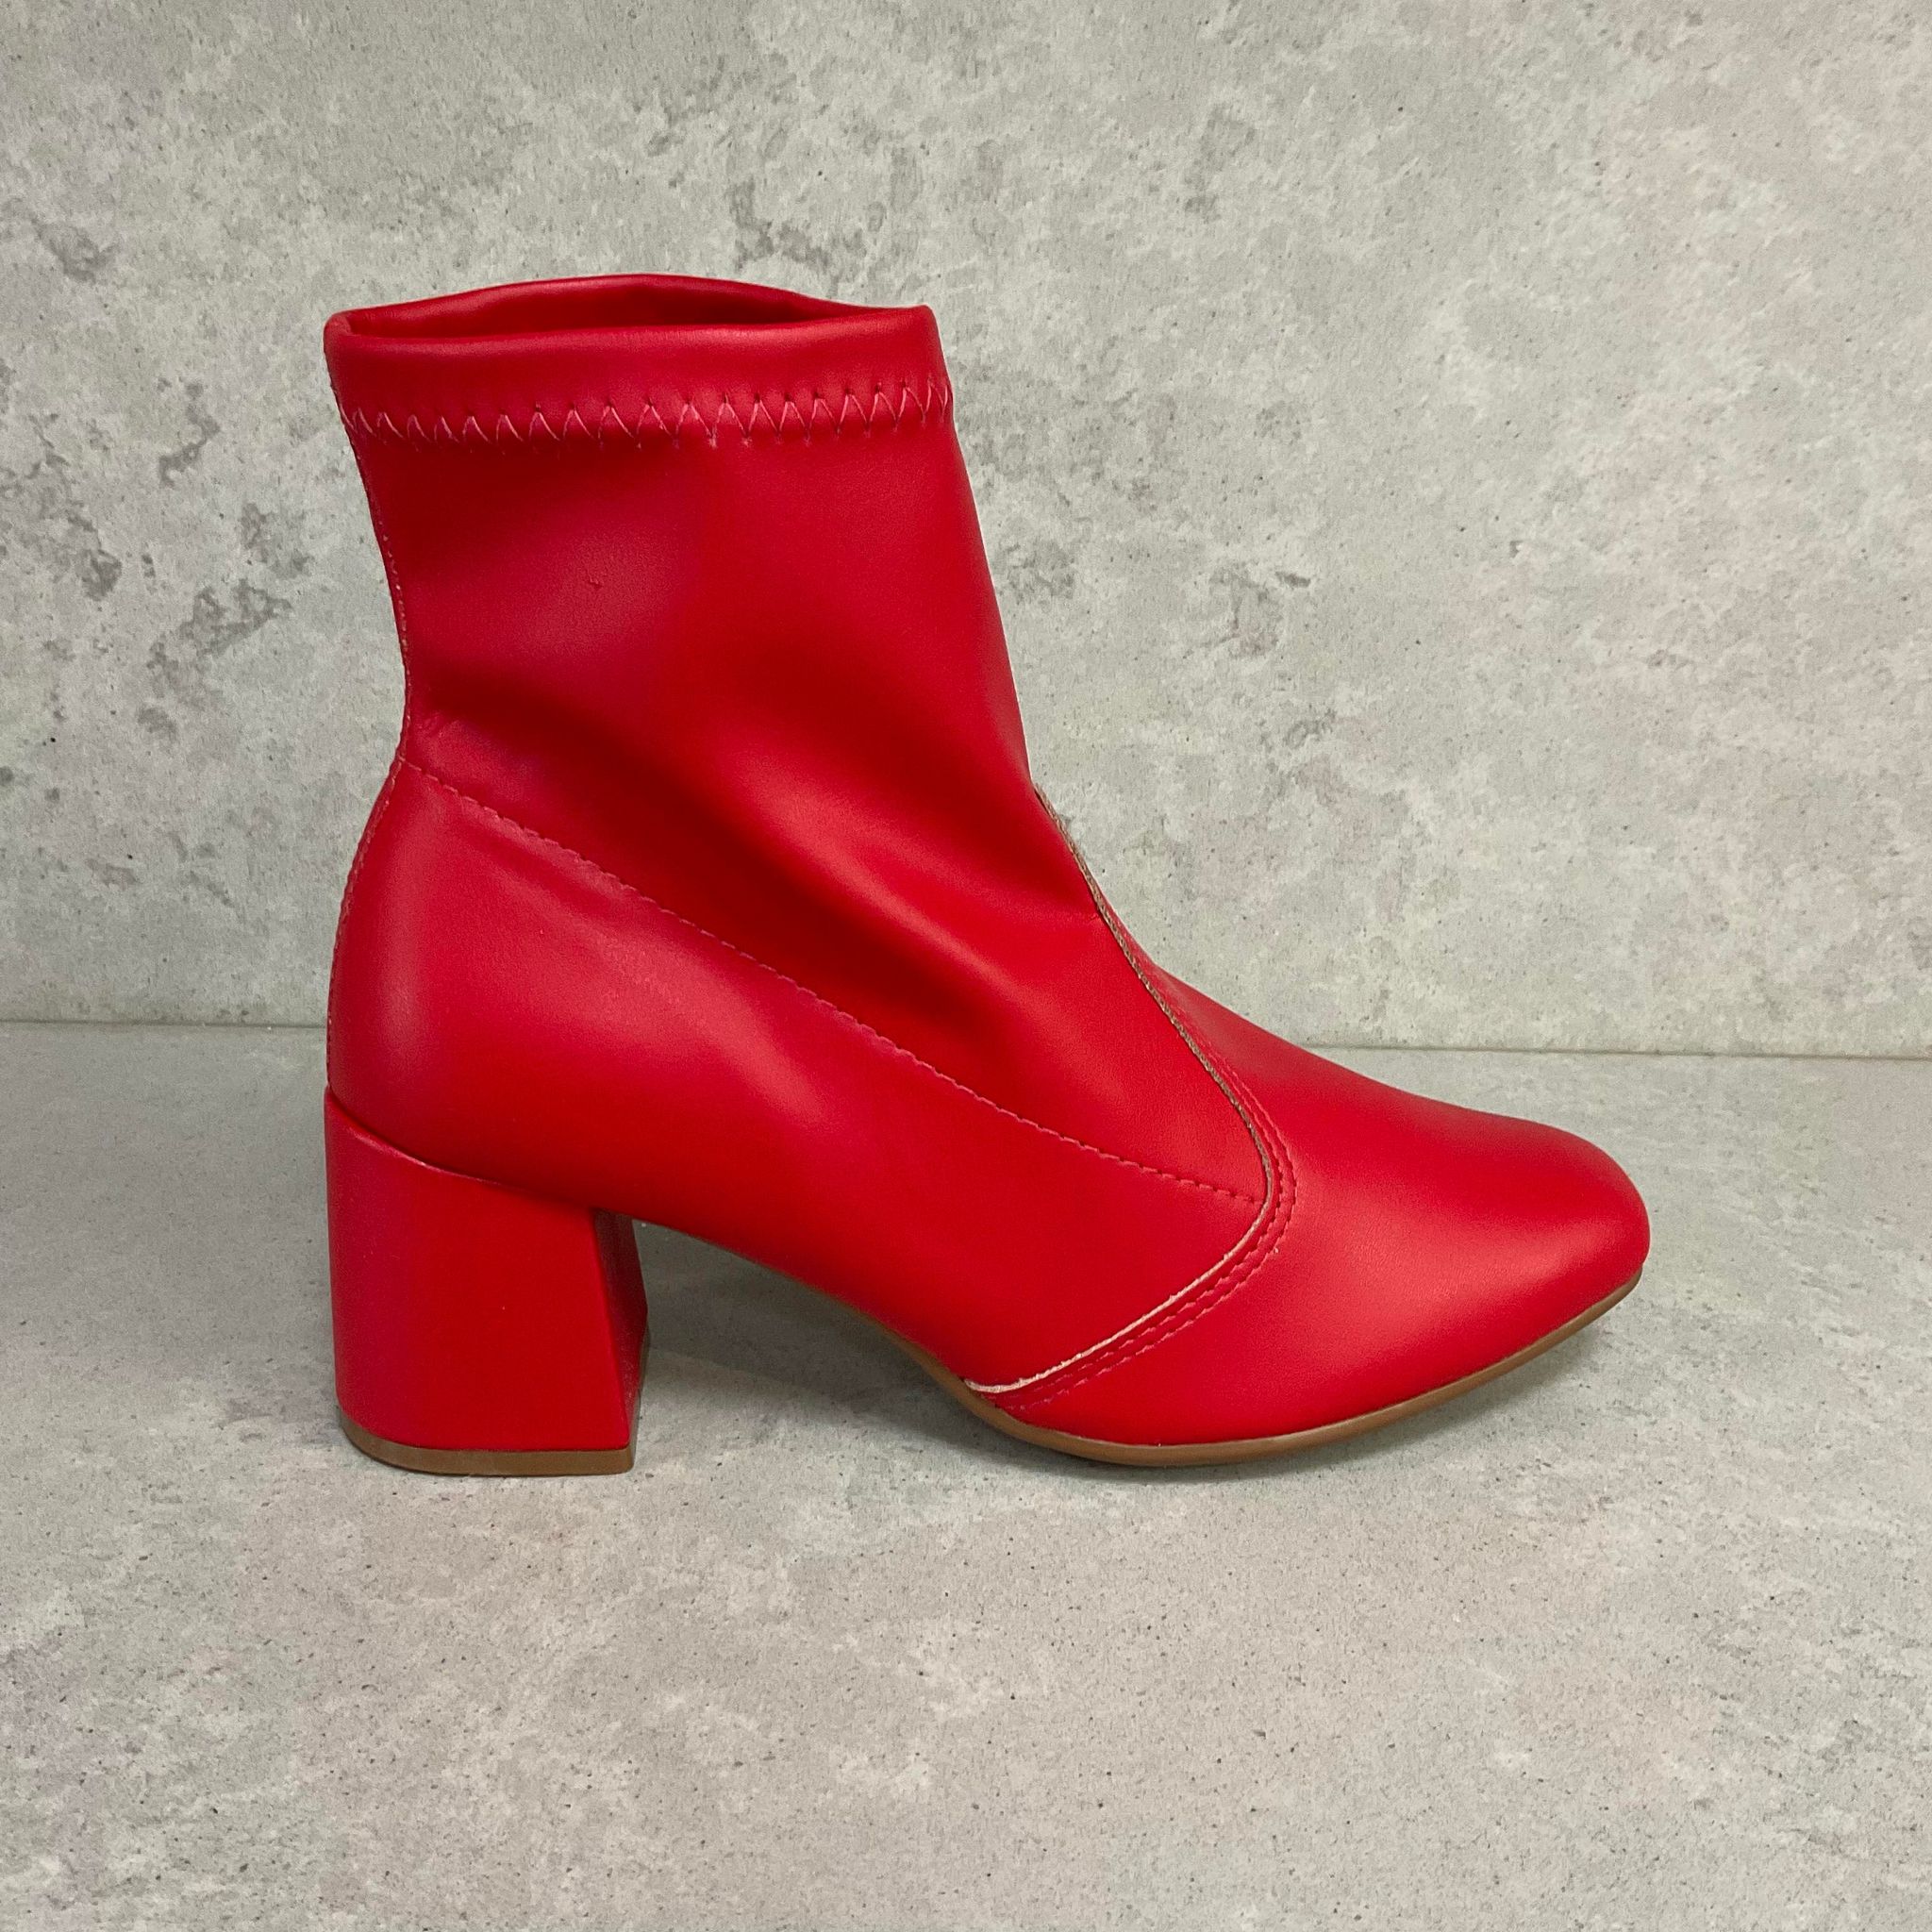 Red Side Zippers Pointed Head Ankle High Stiletto Heels Boots ...